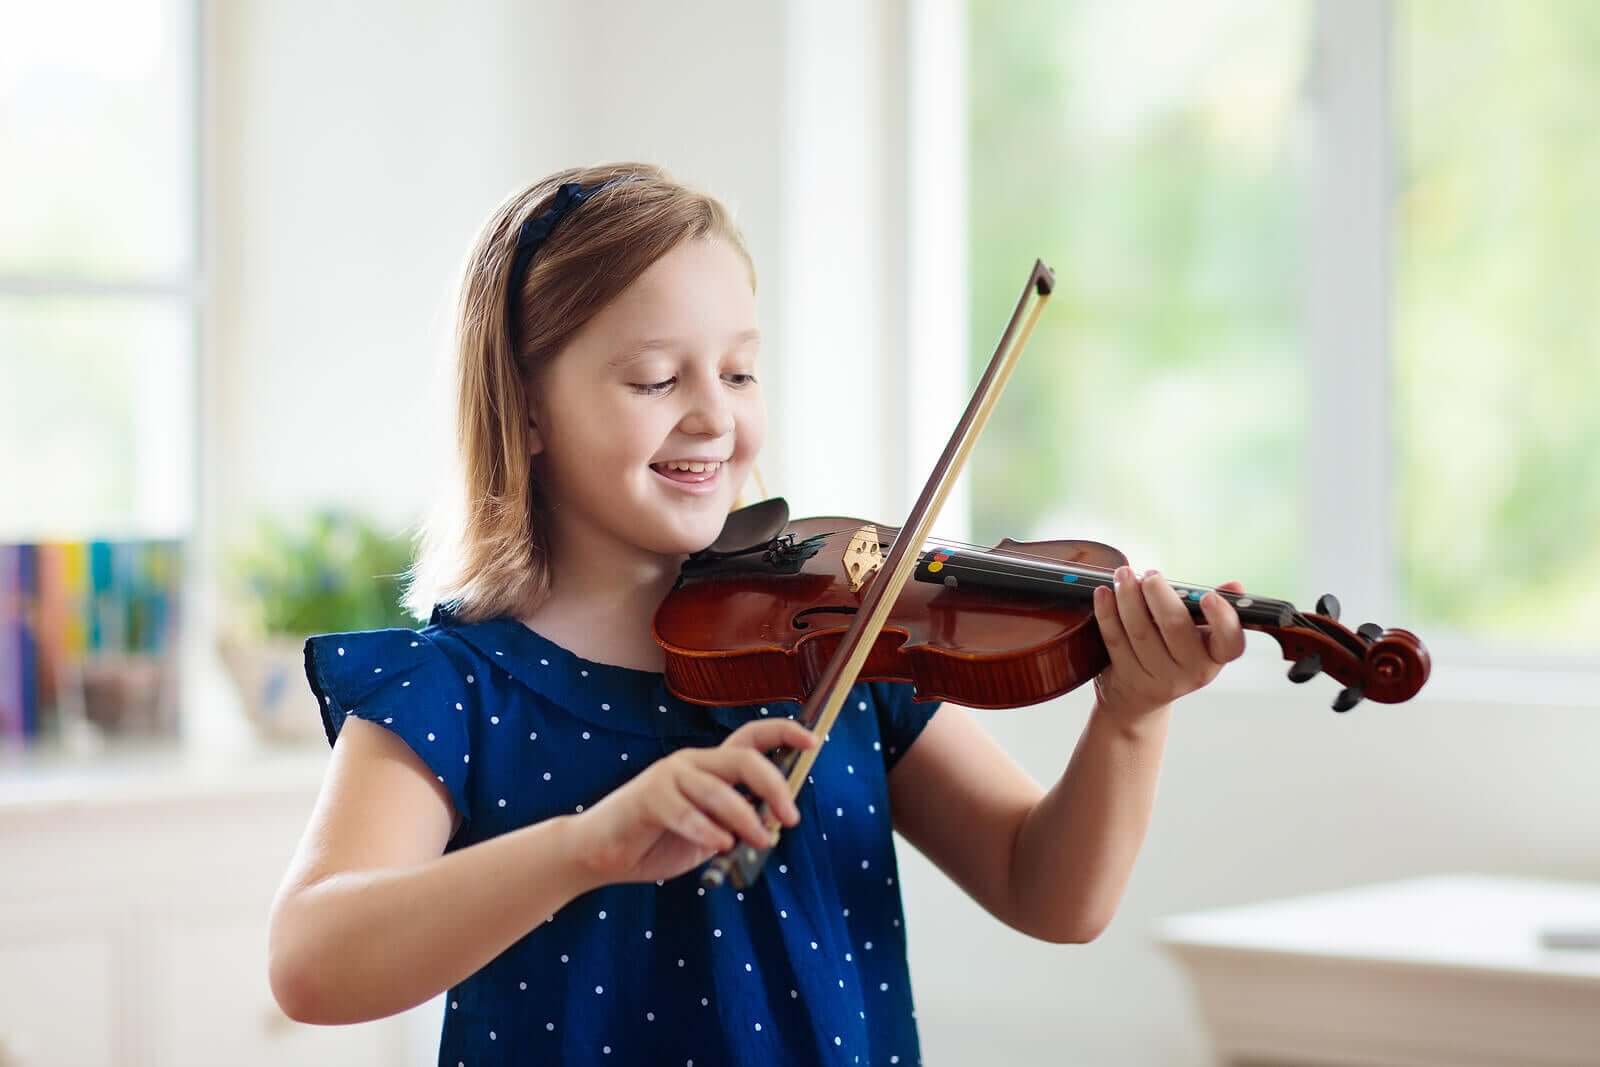 How Musical Training Influences Memory and Attention in Children